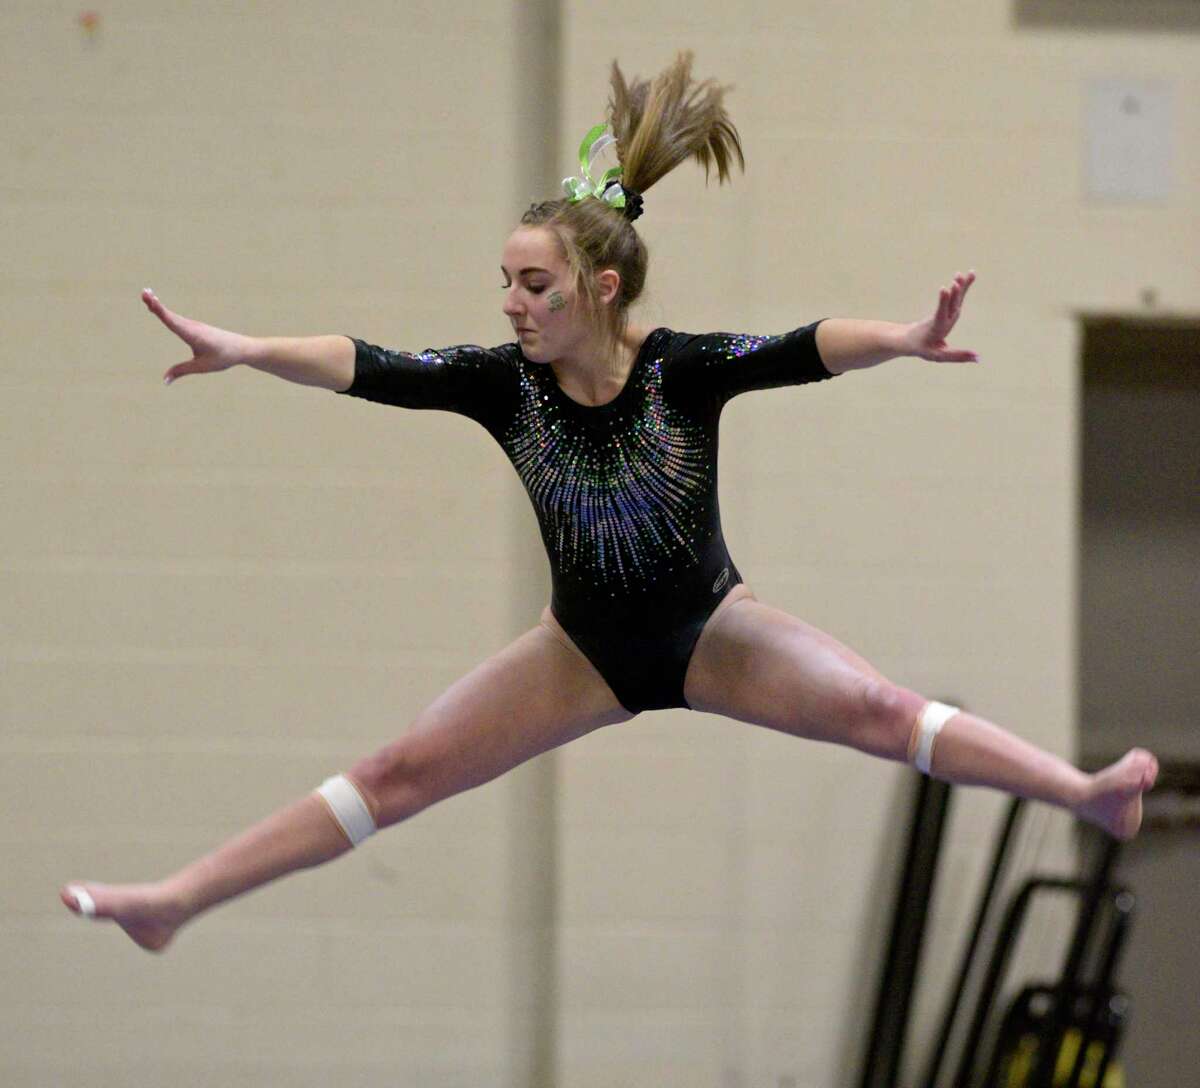 New Milford High School's Hailey Best competes on the beam during the SWC gymnastics championships, Thursday night, February 13, 202, at New Milford High School, New Milford, Conn.